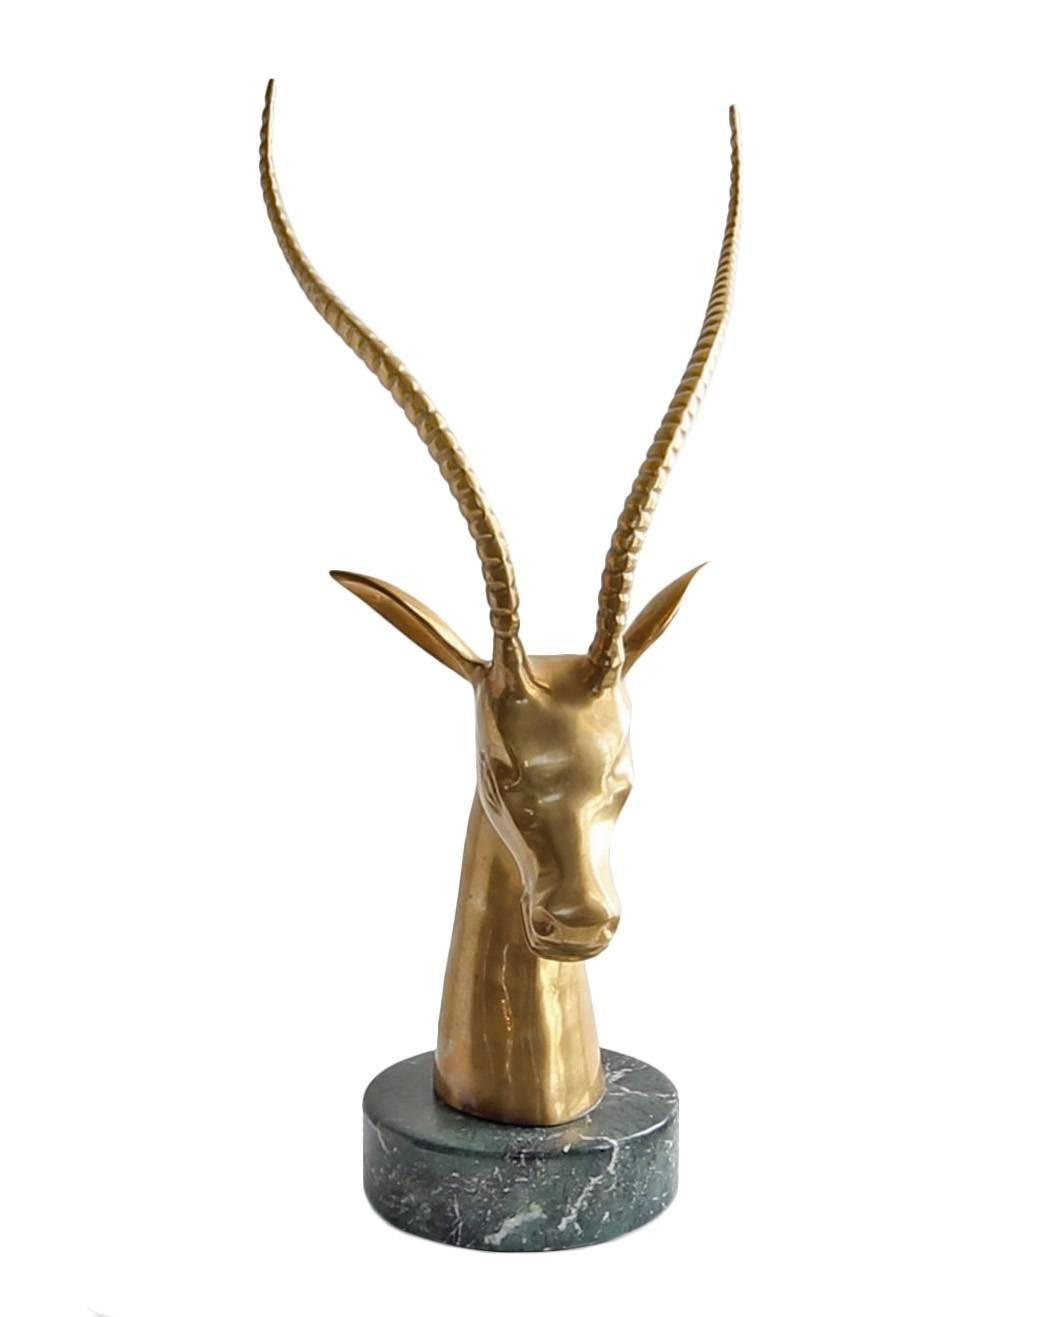 This gorgeous Mid-Century brass impala sculpture is impressive in its size and scale. It is mounted to green marble base and is nearly 21 inches tall. Beautiful original patina give this a touch of Mid-Century glamour. Unmarked but attributed to